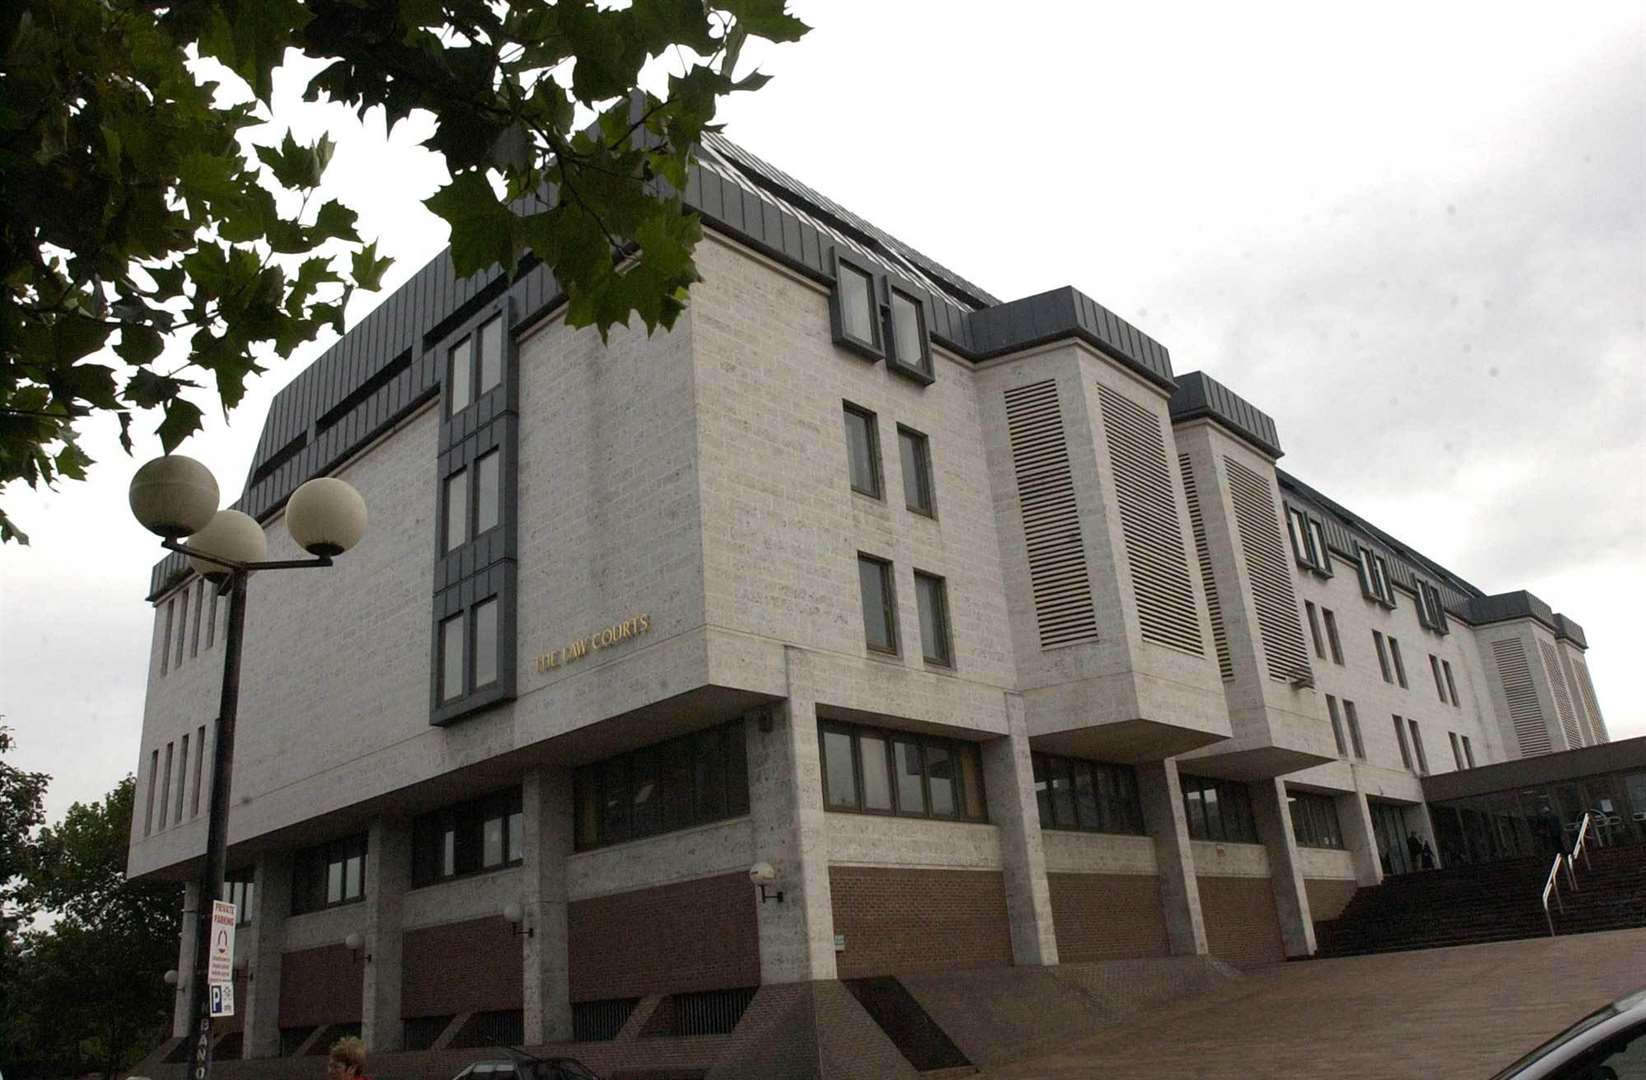 The murder trial is taking place at Maidstone Crown Court